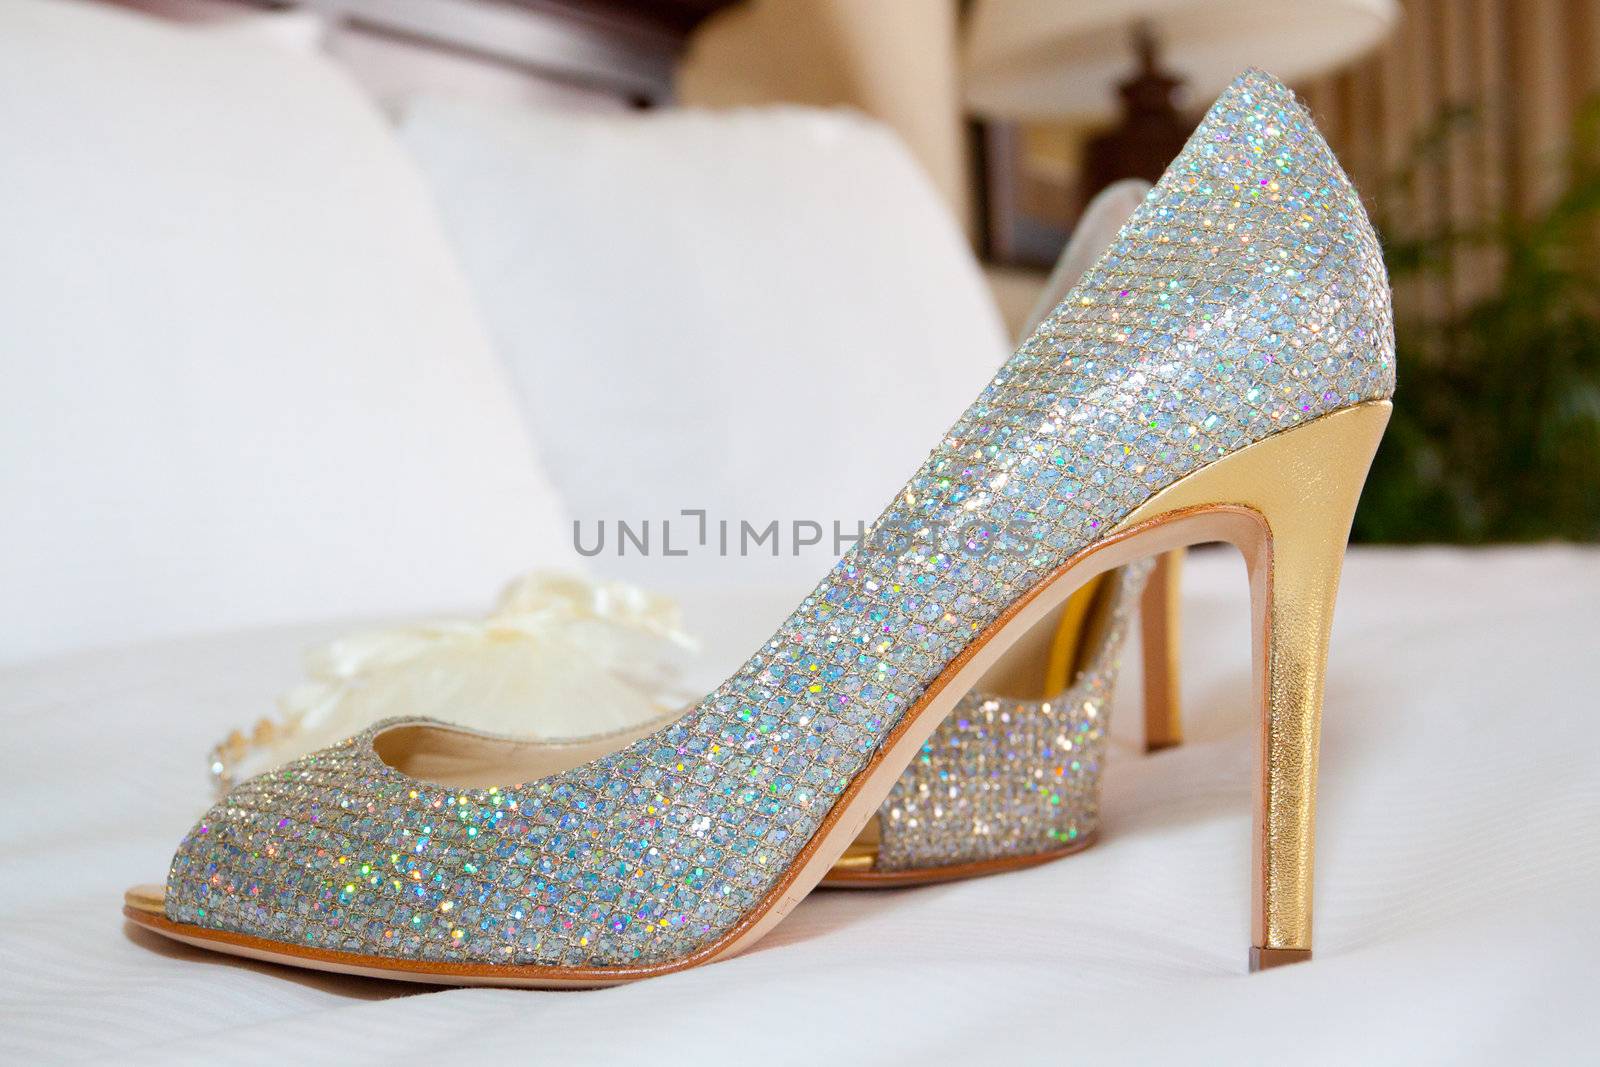 A bride's shoes sparkle while setting on the bed before a wedding ceremony.